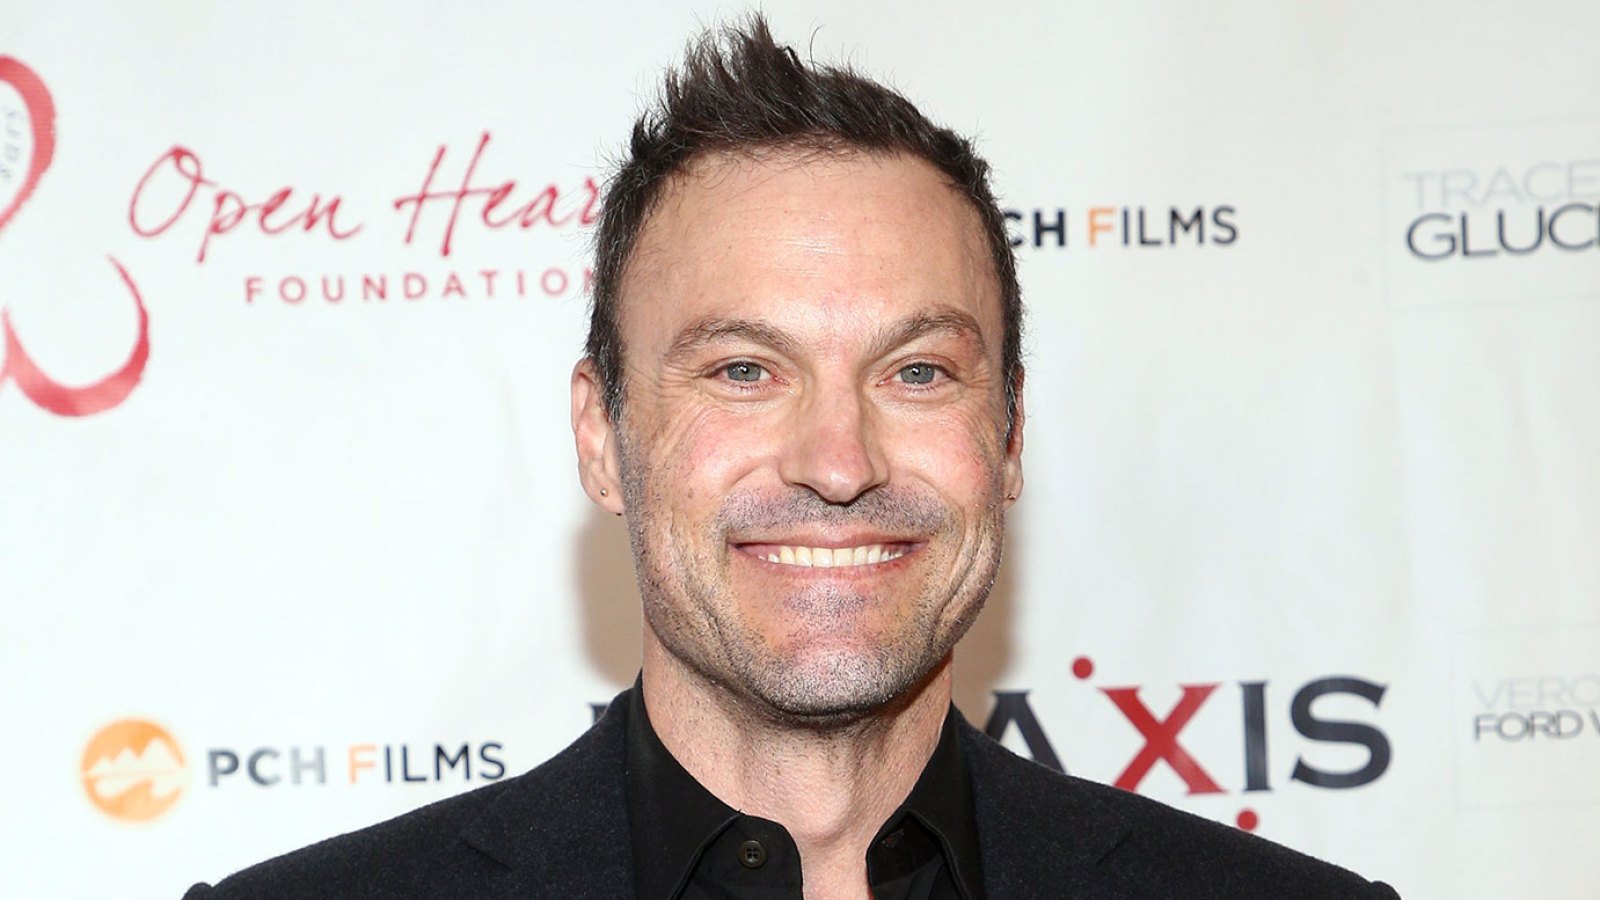 Brian Austin Green Decided to Change His Diet After Losing 20 Lbs Amid Rough Ulcerative Colitis Diagnosis